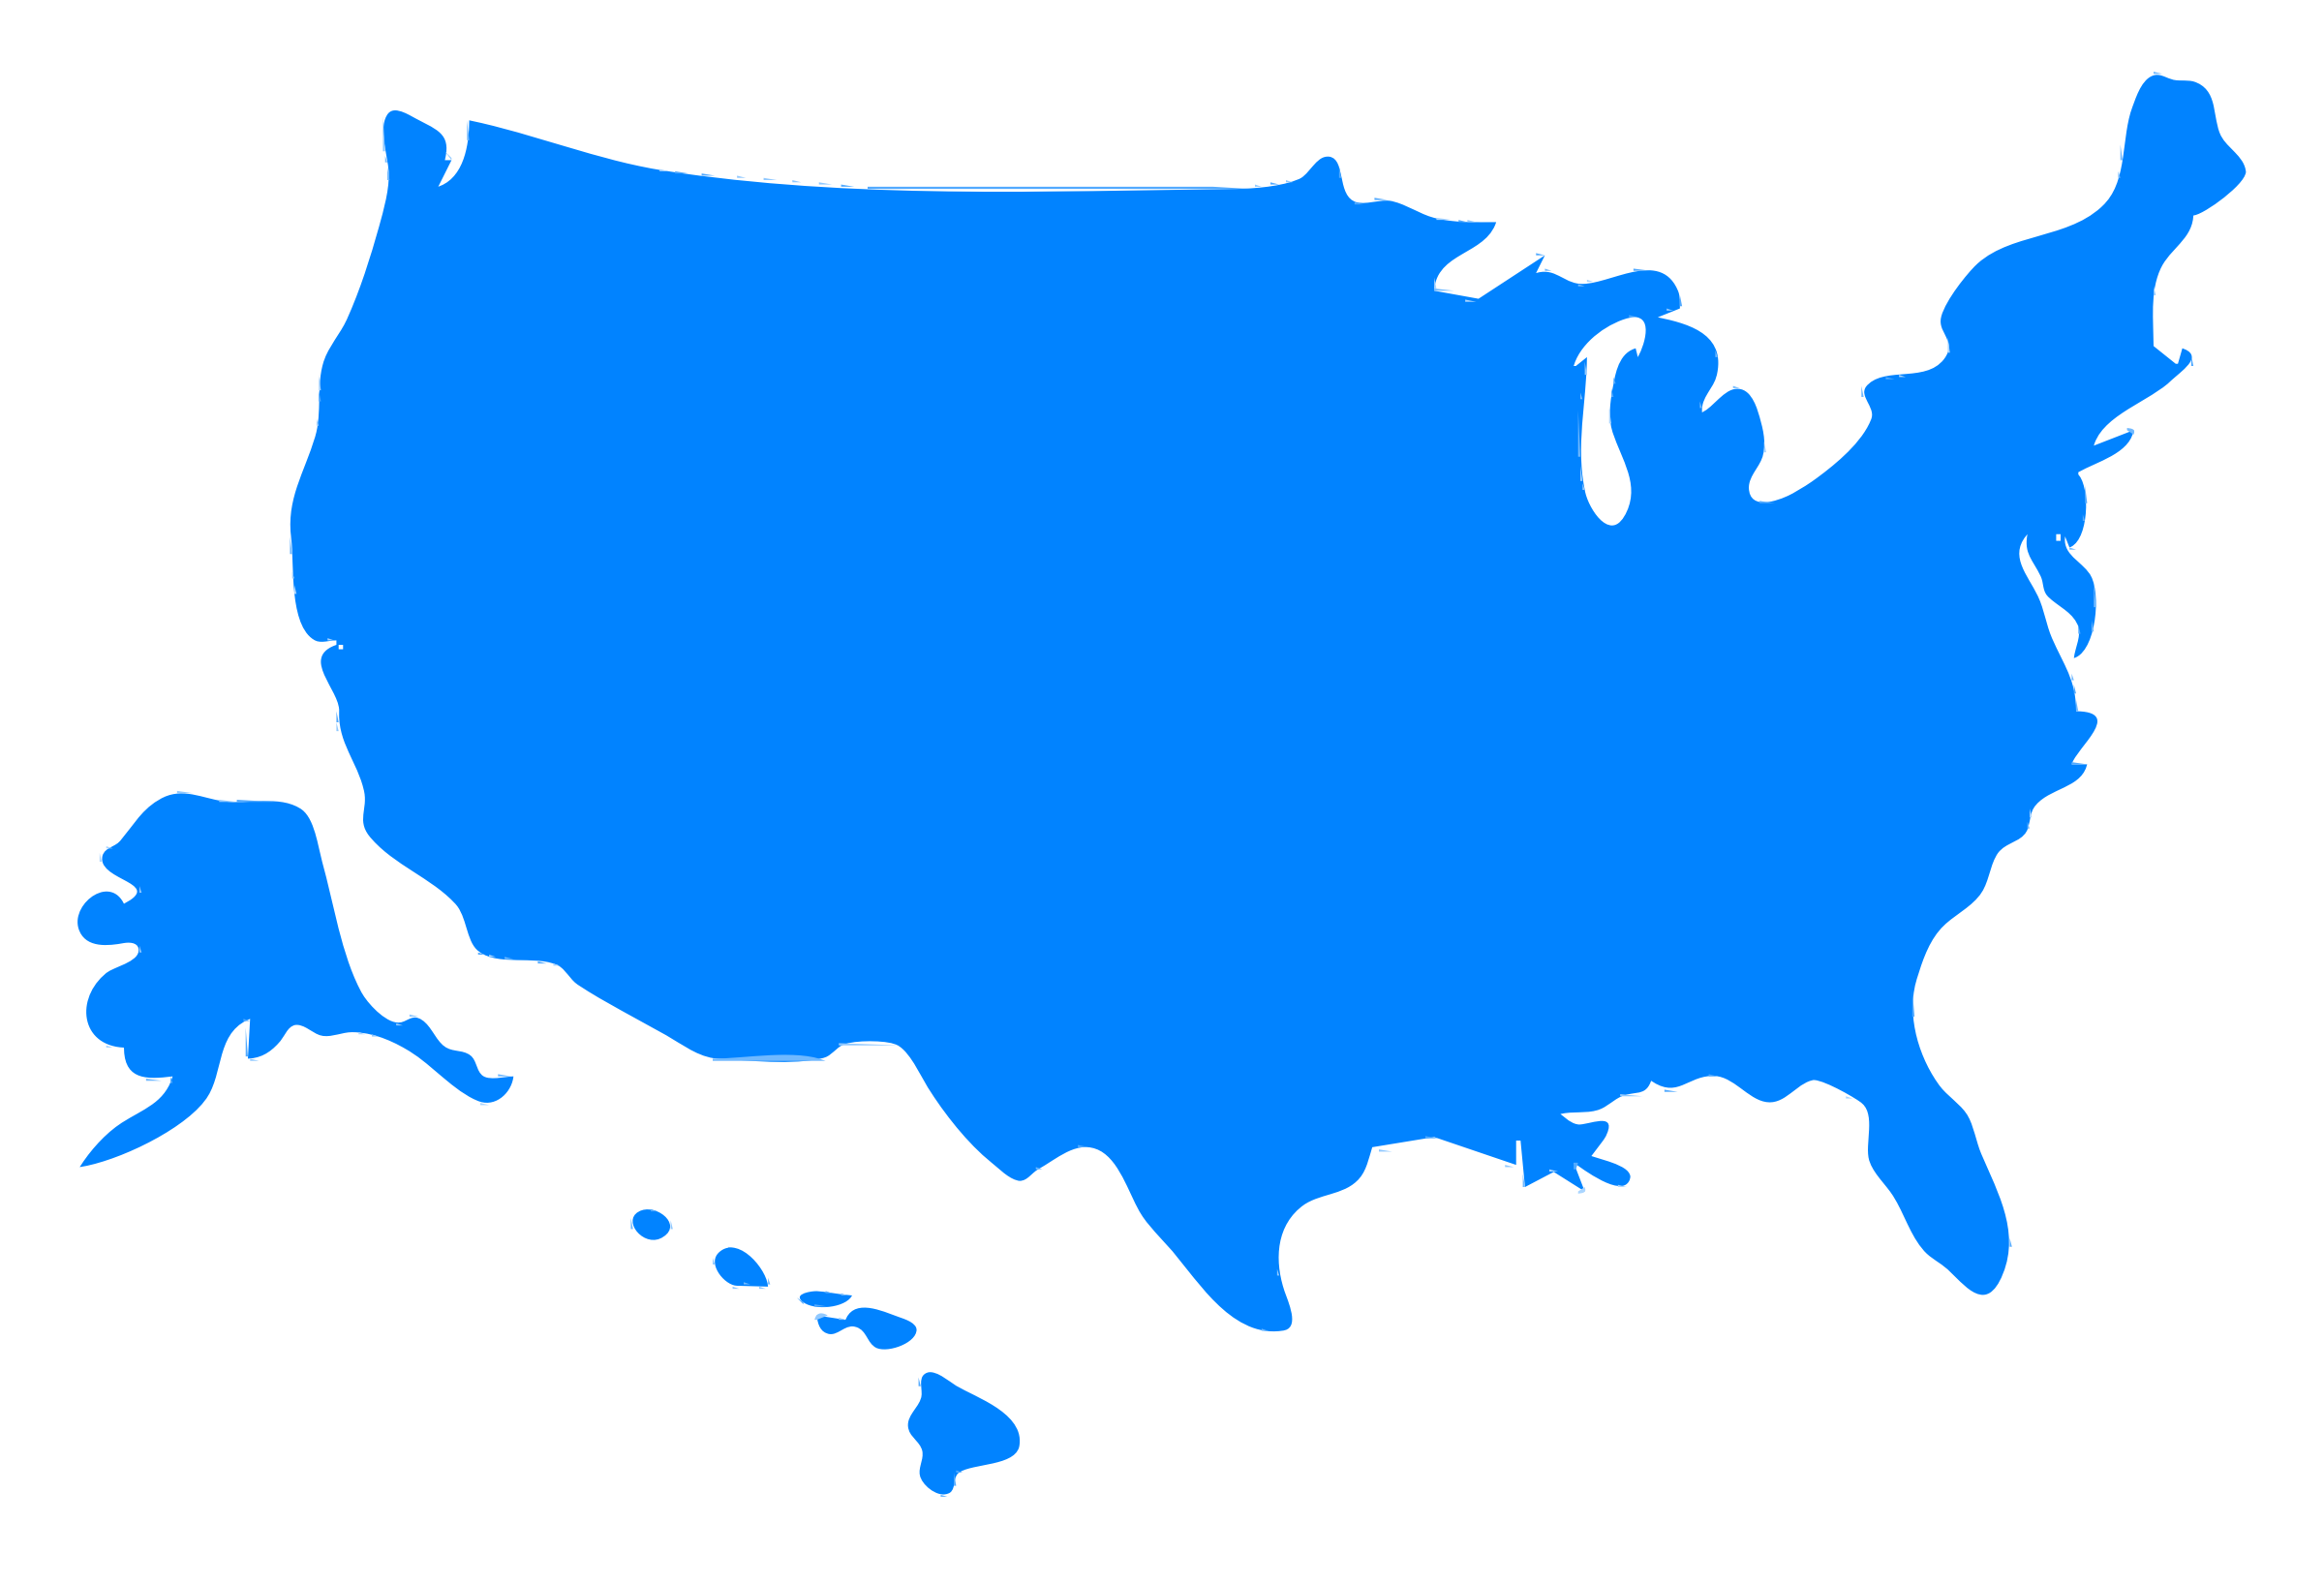 Us map clipart usa map silhouette image 28463